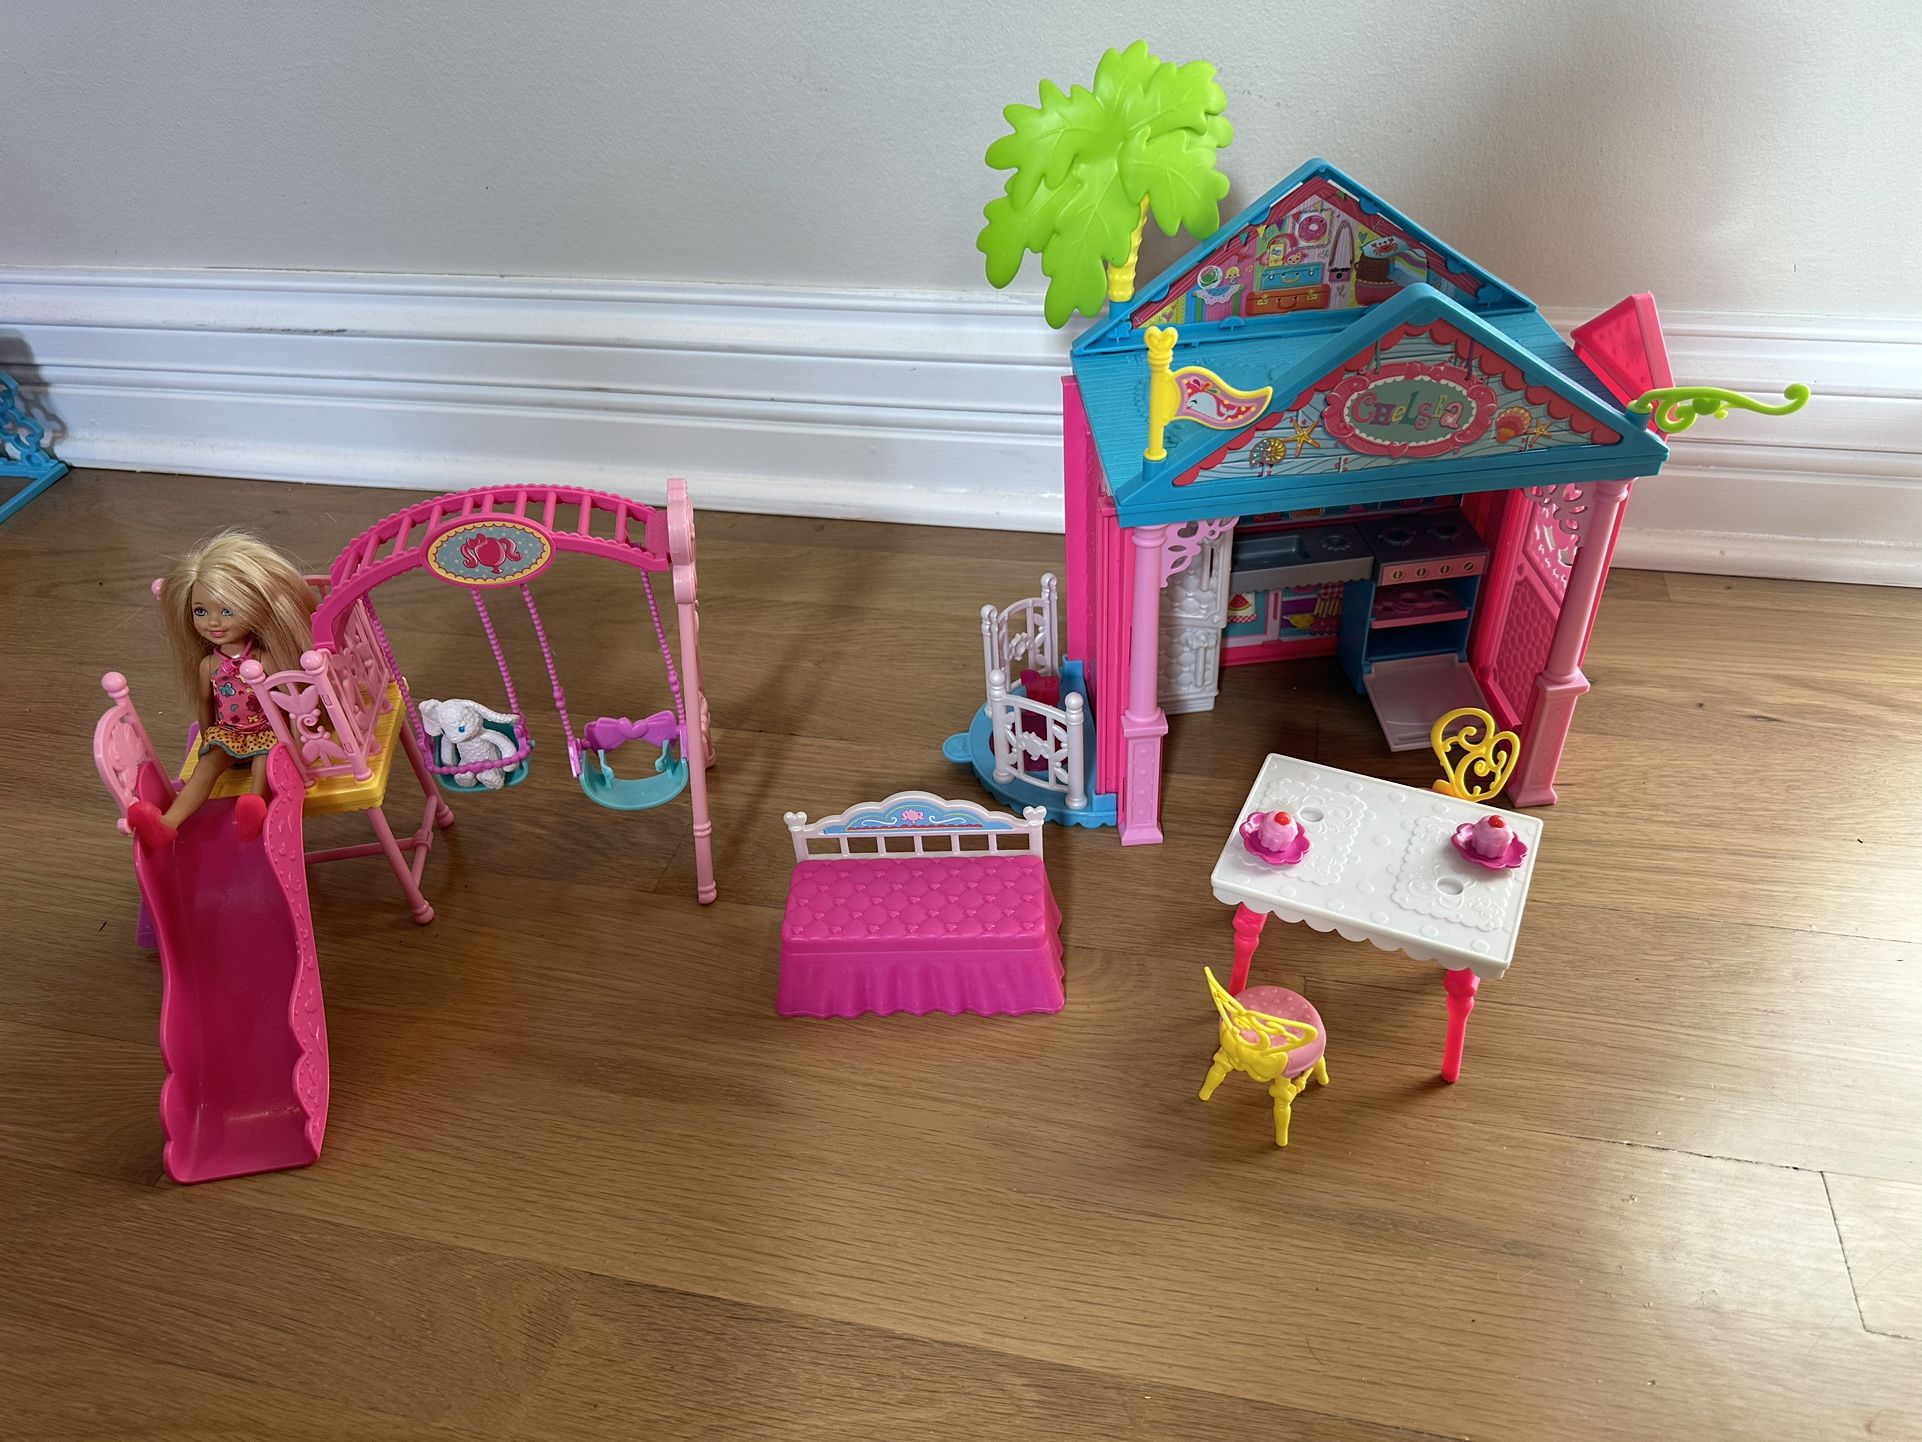 Chelsea Clubhouse Playset and Swing set